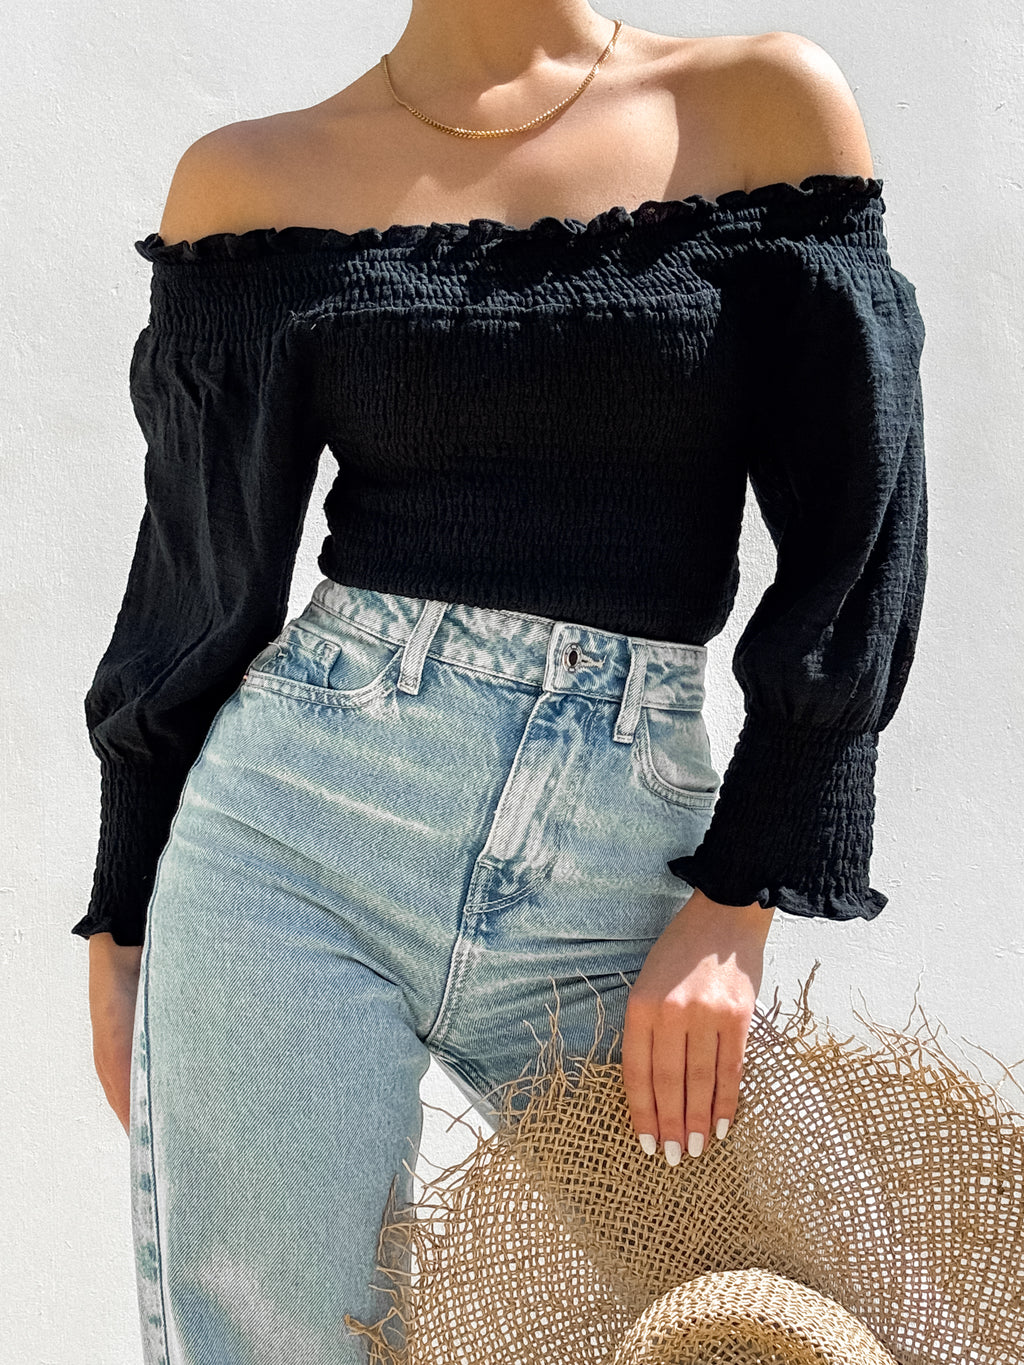 Milo Gauze Top in Black - Final Sale - Stitch And Feather